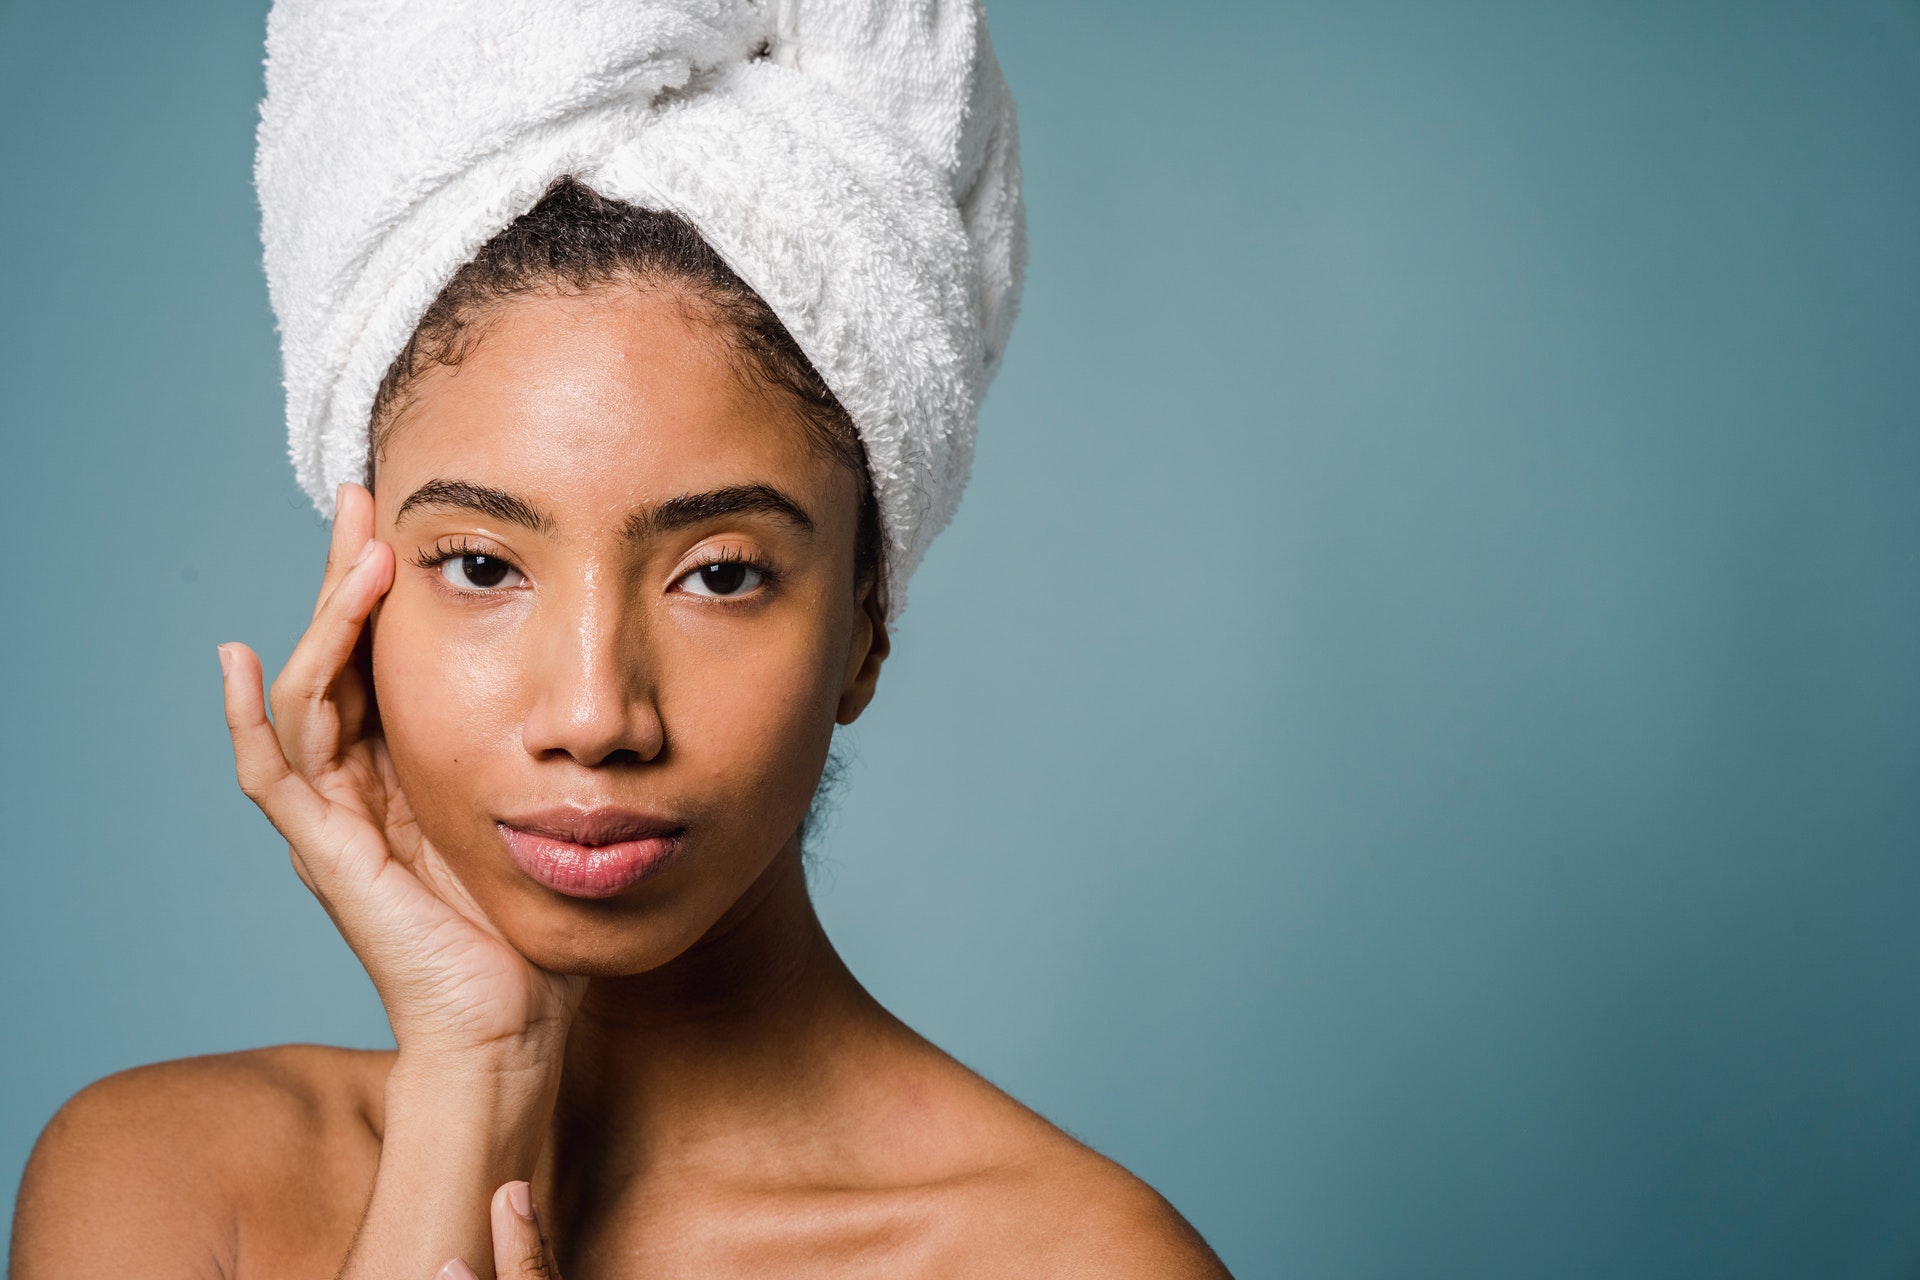 woman wearing towel in hair and touching face